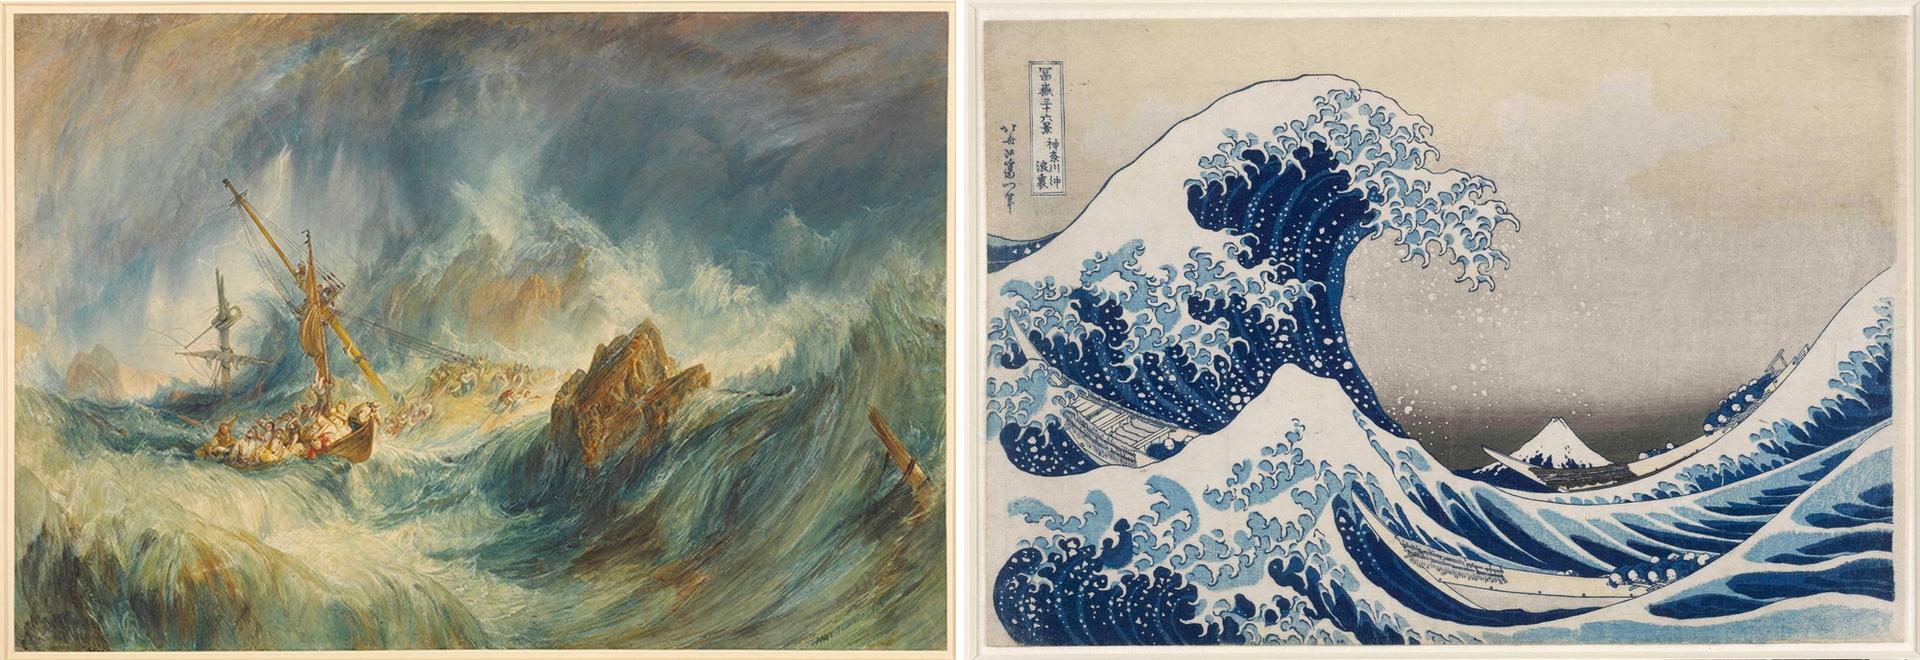 The British Museum has turned both Joseph Mallord William Turner's A Storm (Shipwreck, 1823) and Katsushika Hokusai's Under the Wave off Kanagawa (The Great Wave, 1831) into NFTs. © 2021, The Trustees of the British Museum